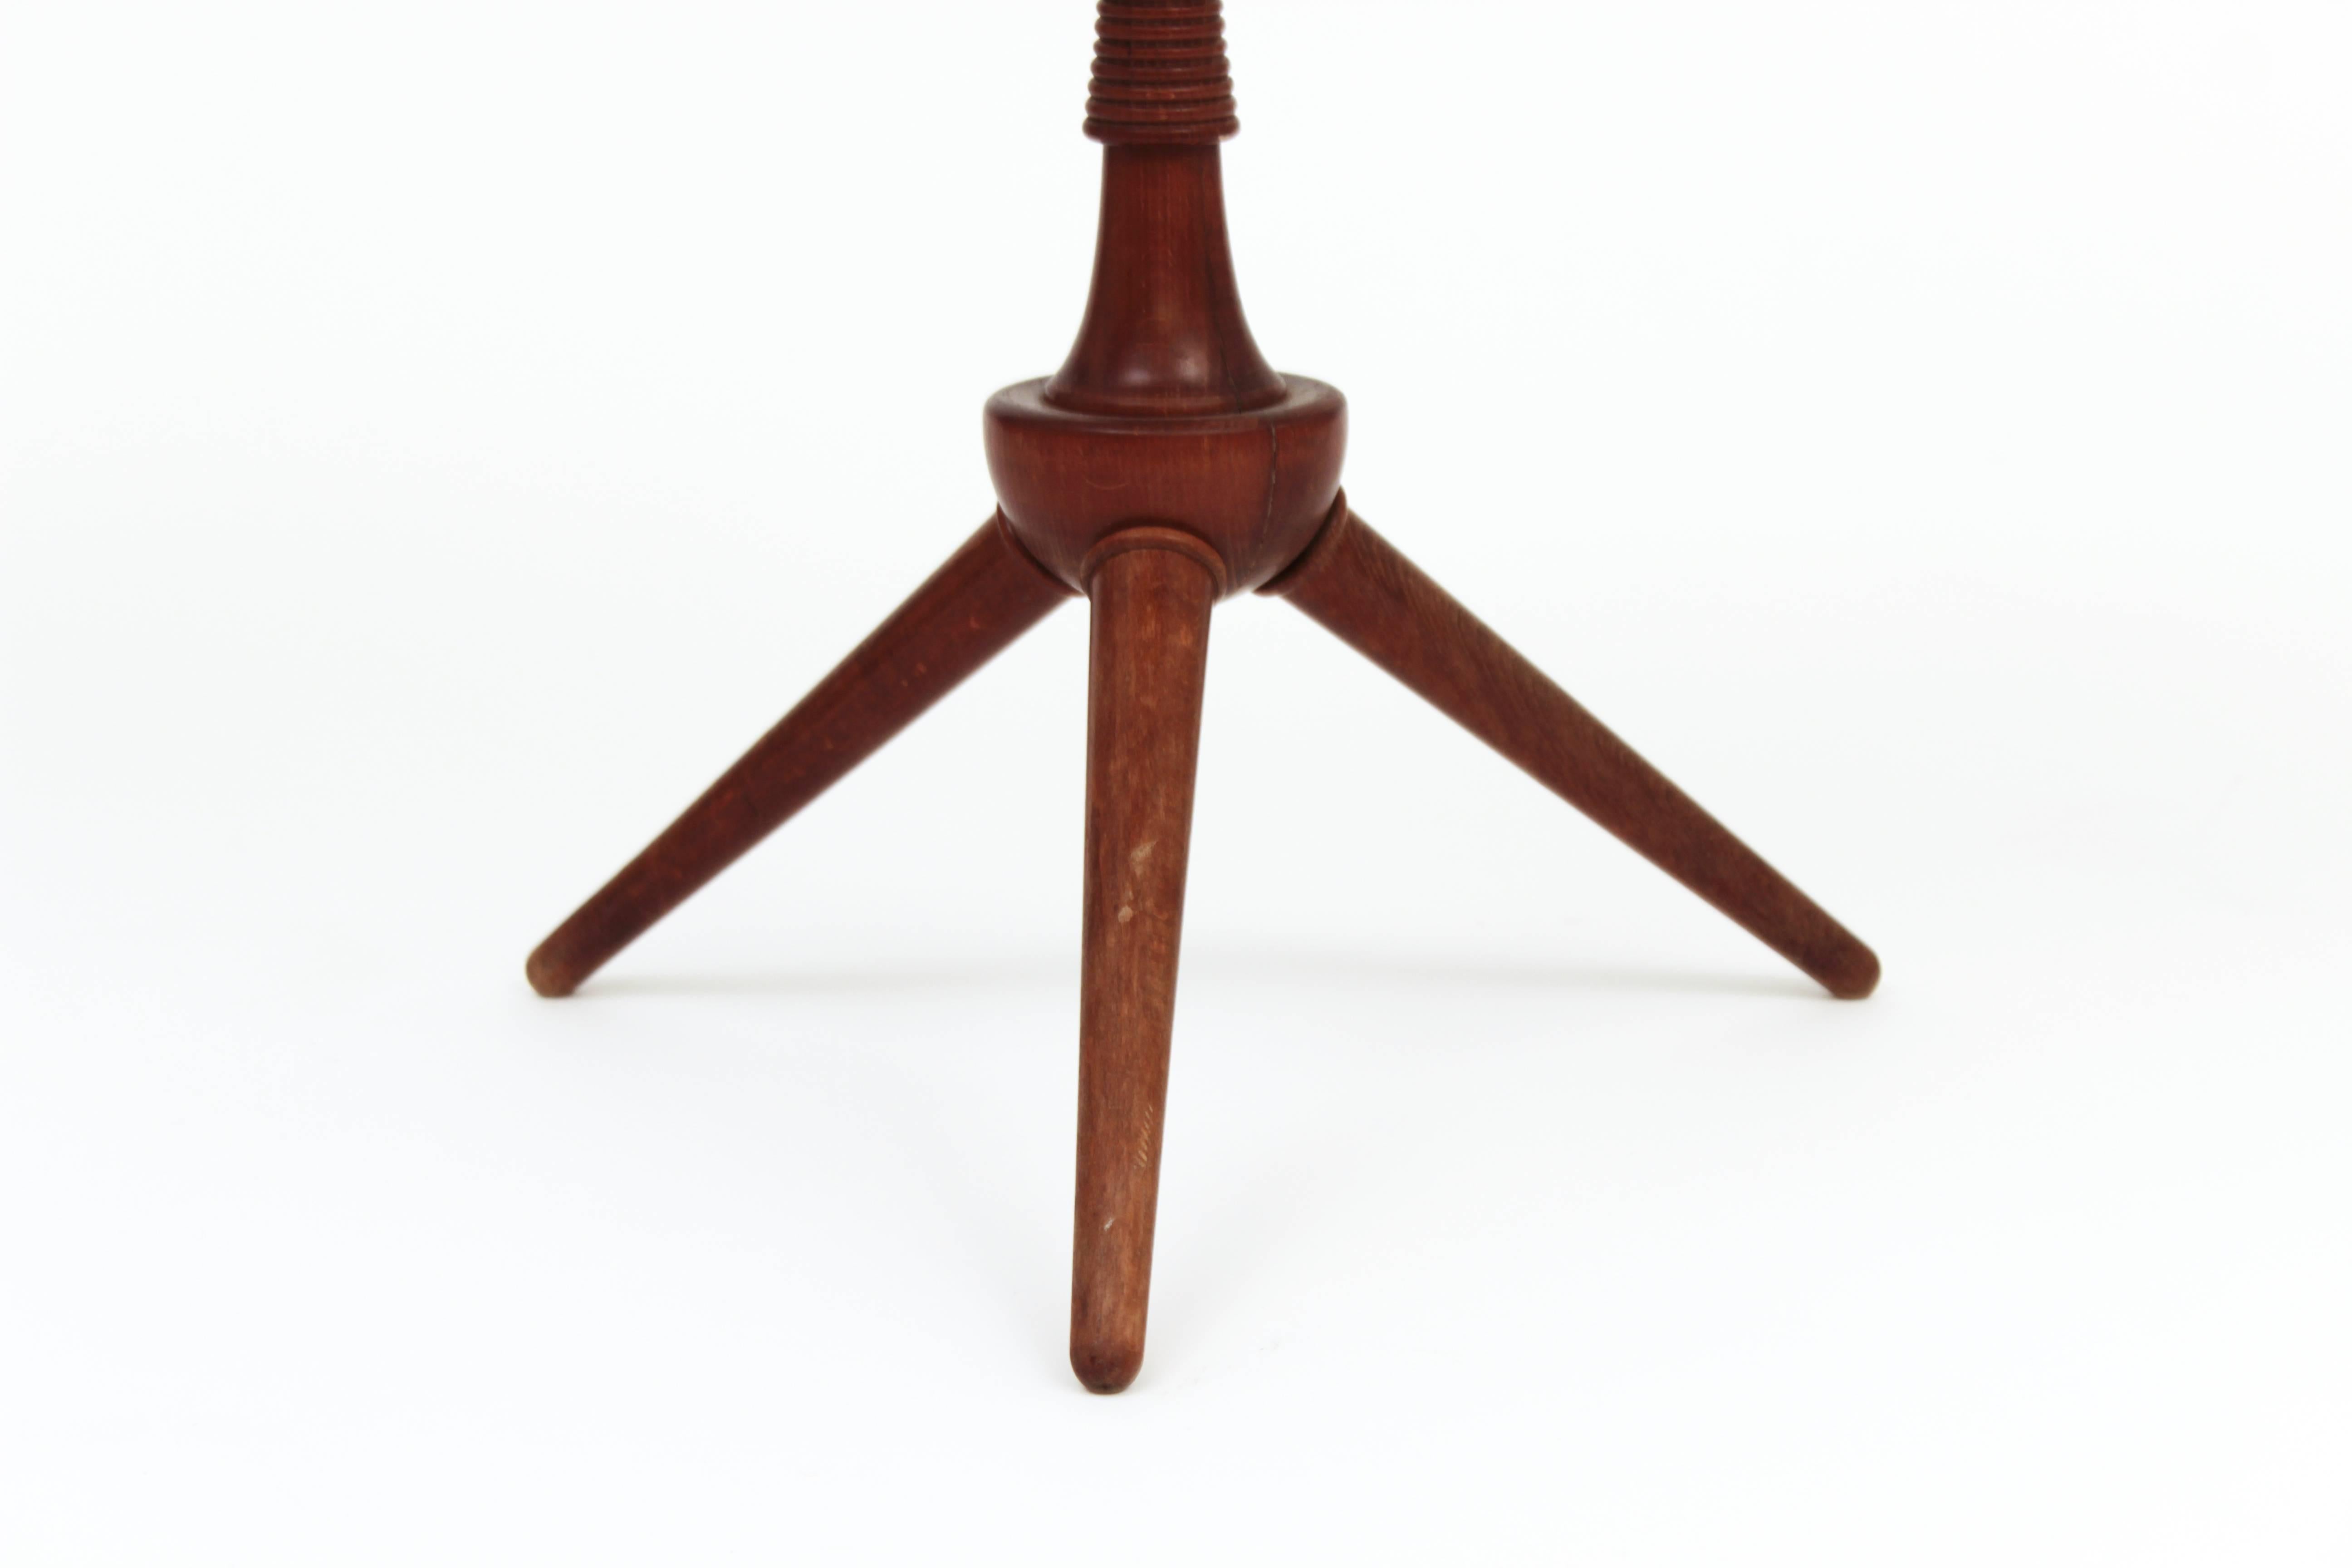 Tripod Pedestal Table by Frits Henningsen, Denmark, circa 1930 In Excellent Condition For Sale In Saint-Ouen, FR